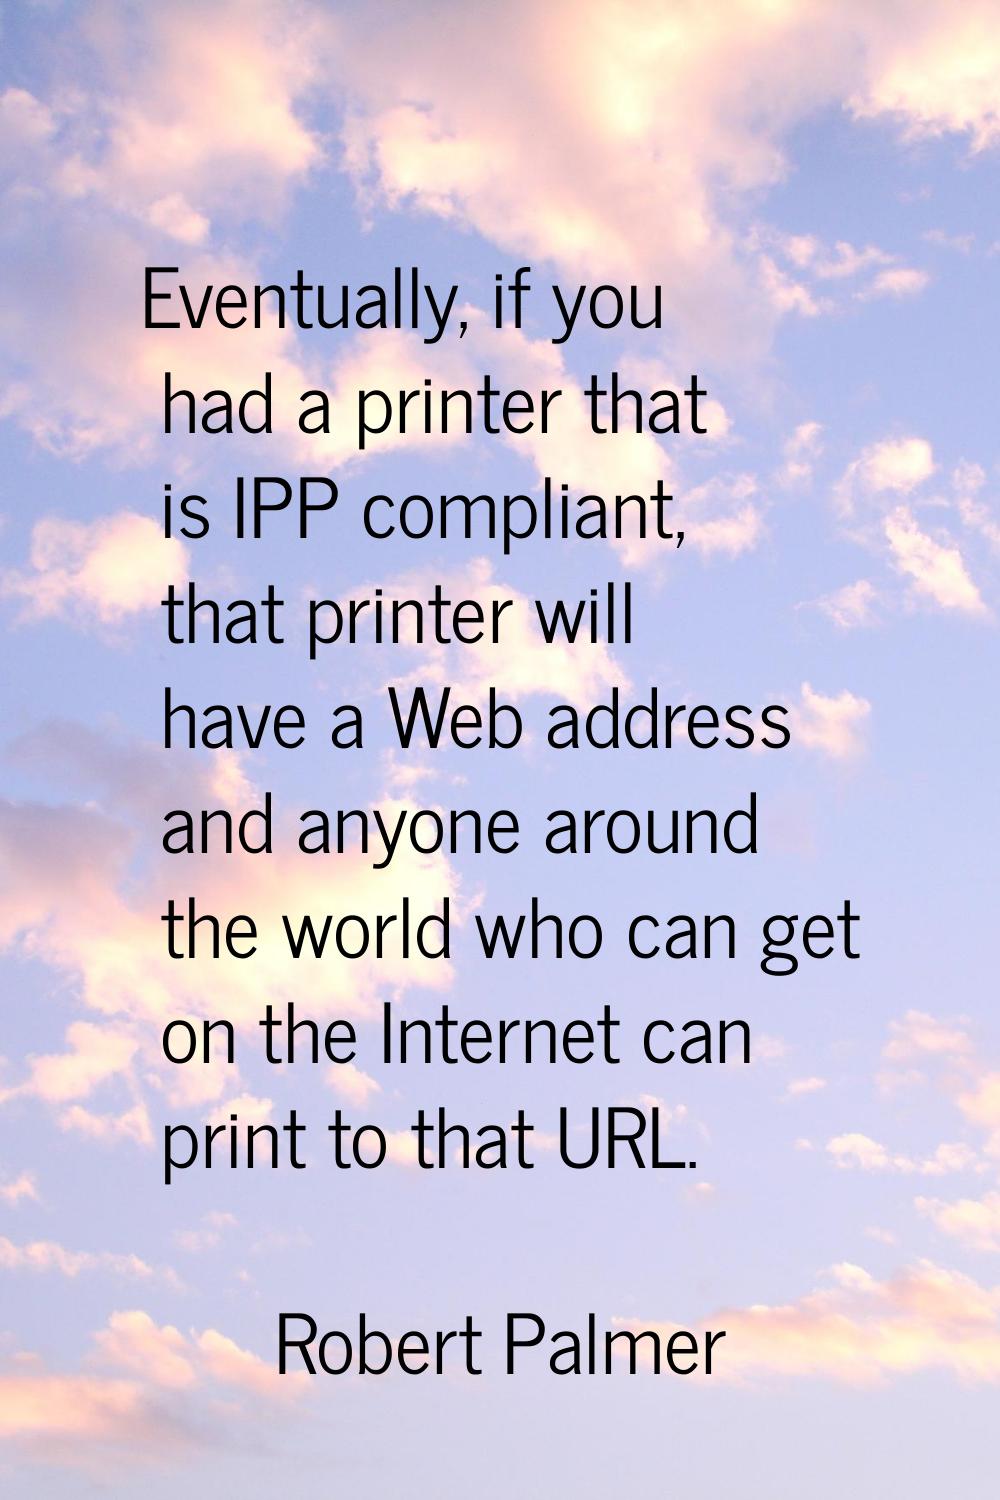 Eventually, if you had a printer that is IPP compliant, that printer will have a Web address and an